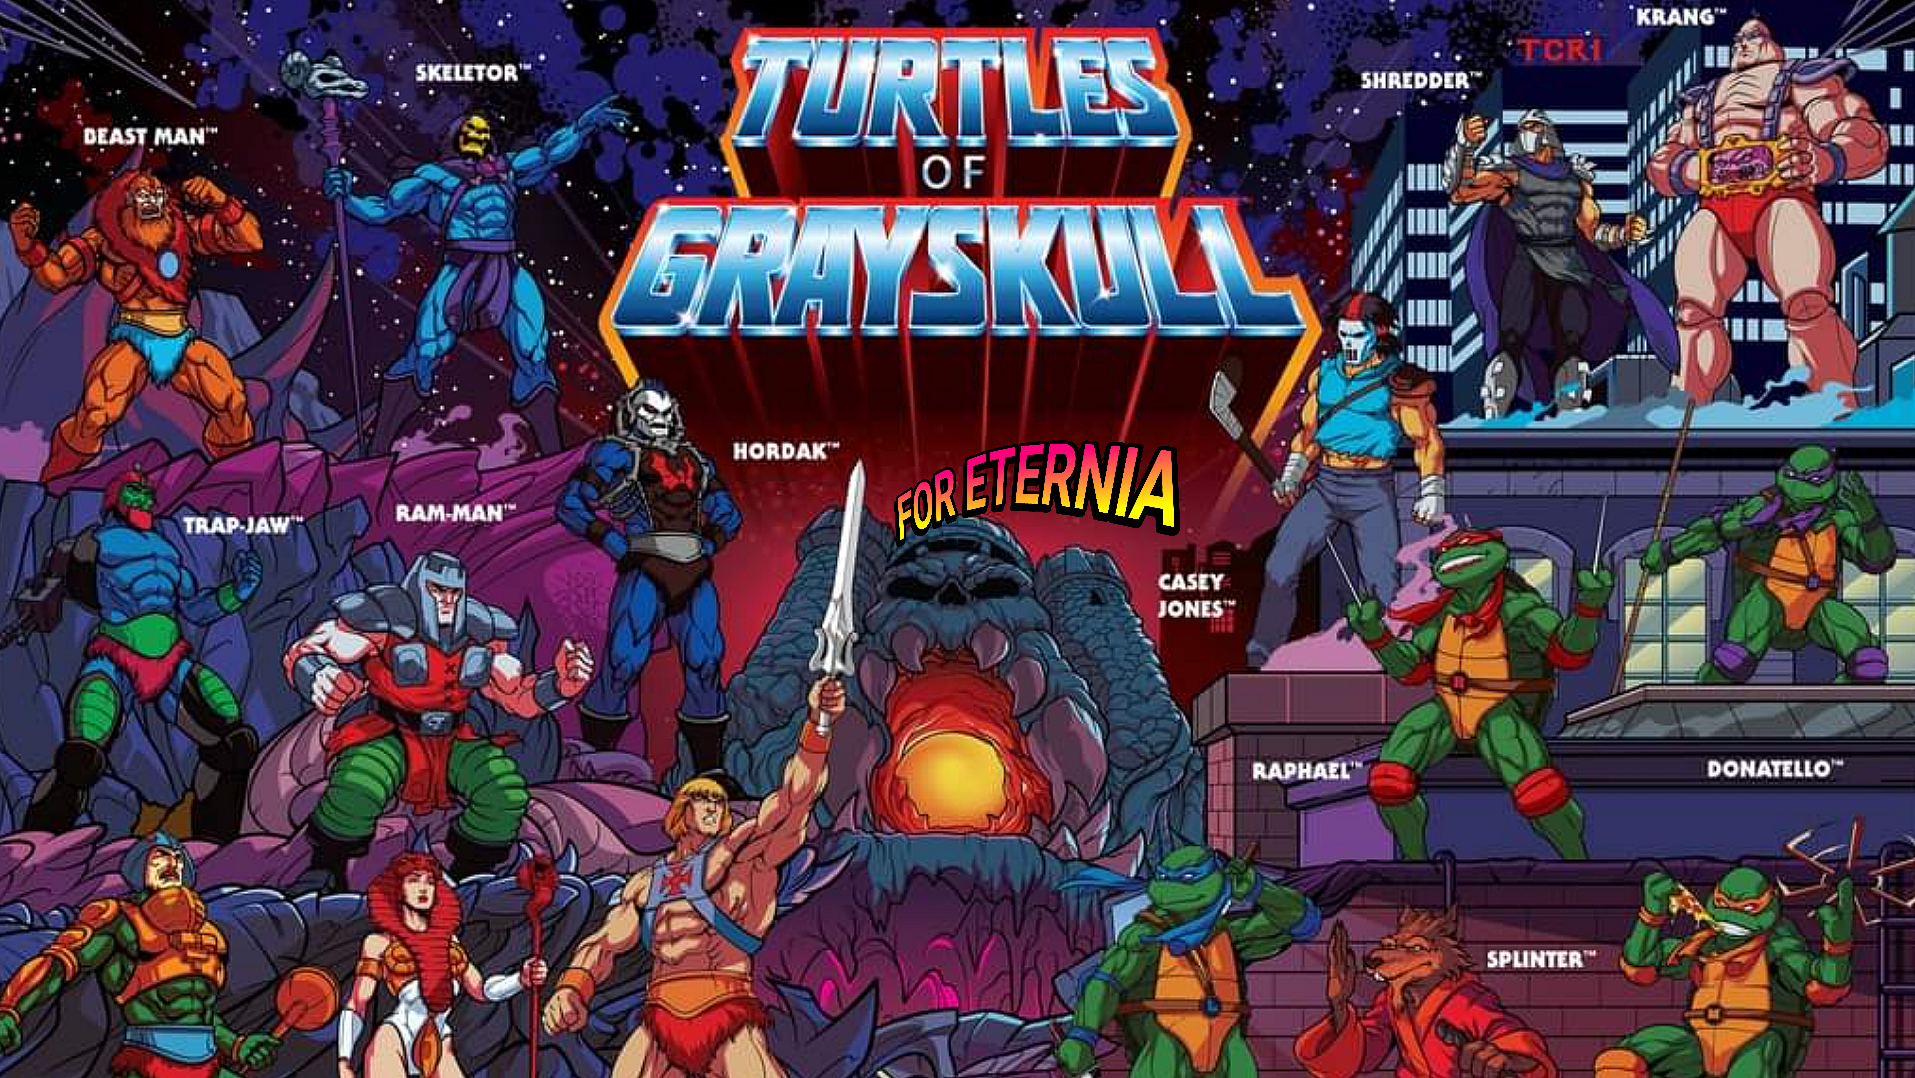 Were the ”Turtles of Grayskull” just teased for the Masterverse action figure line?